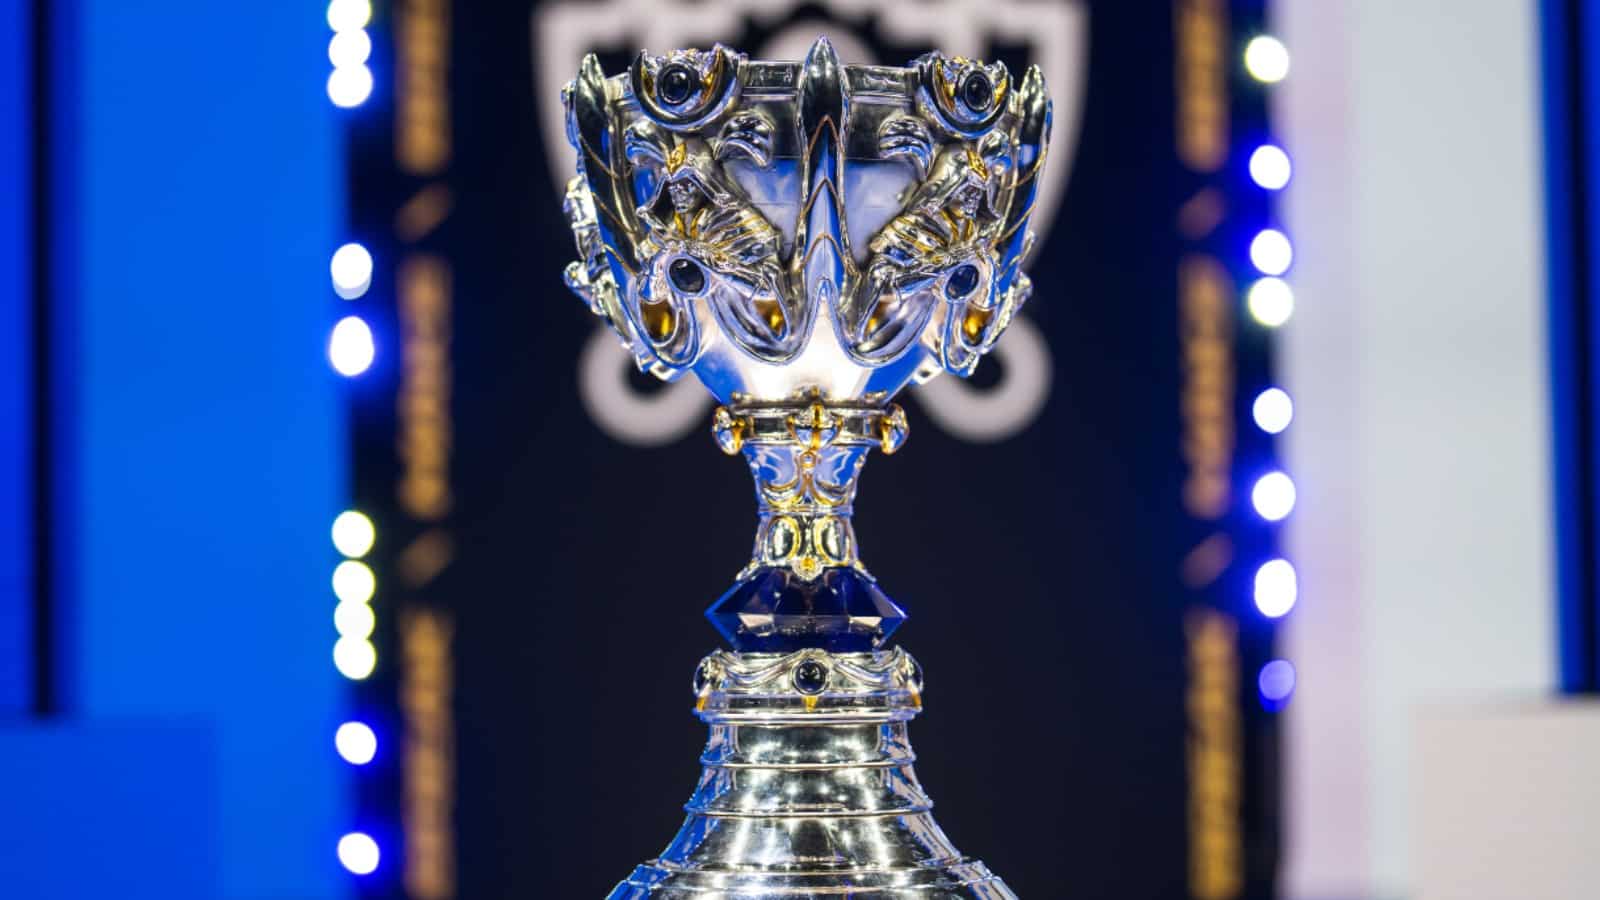 Image of Worlds trophy, the Summoner's Cup